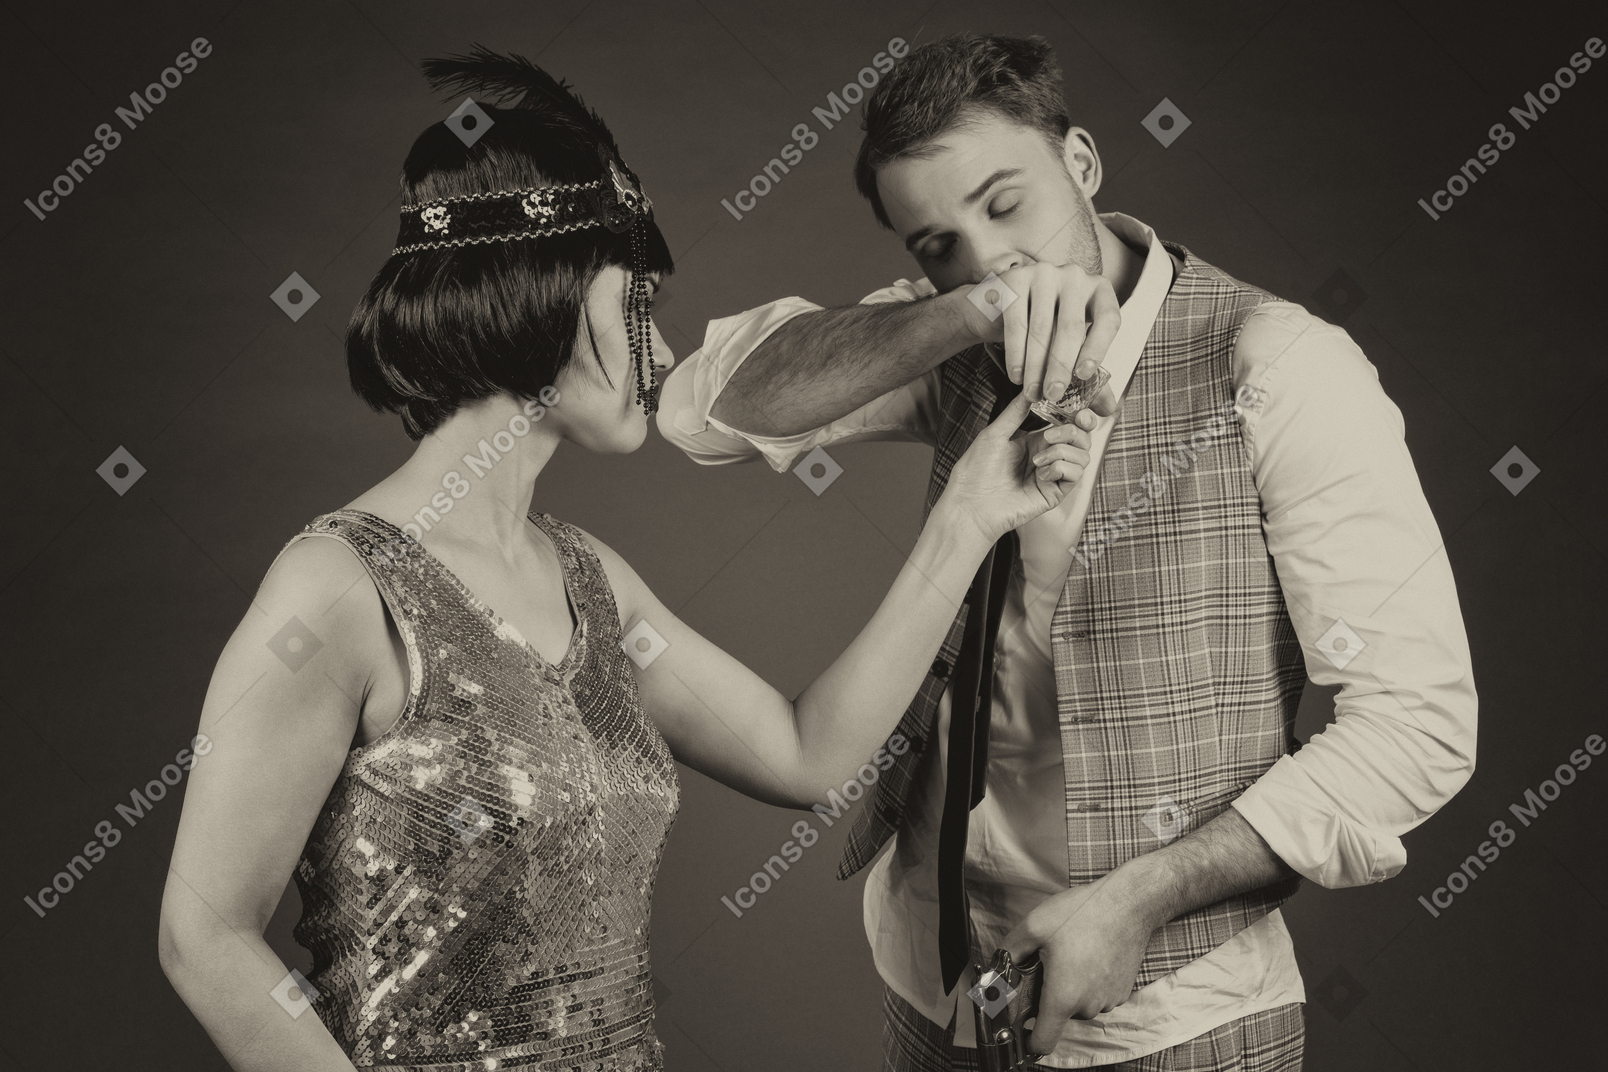 Stylish woman in headdress watching a young man sniffing drug